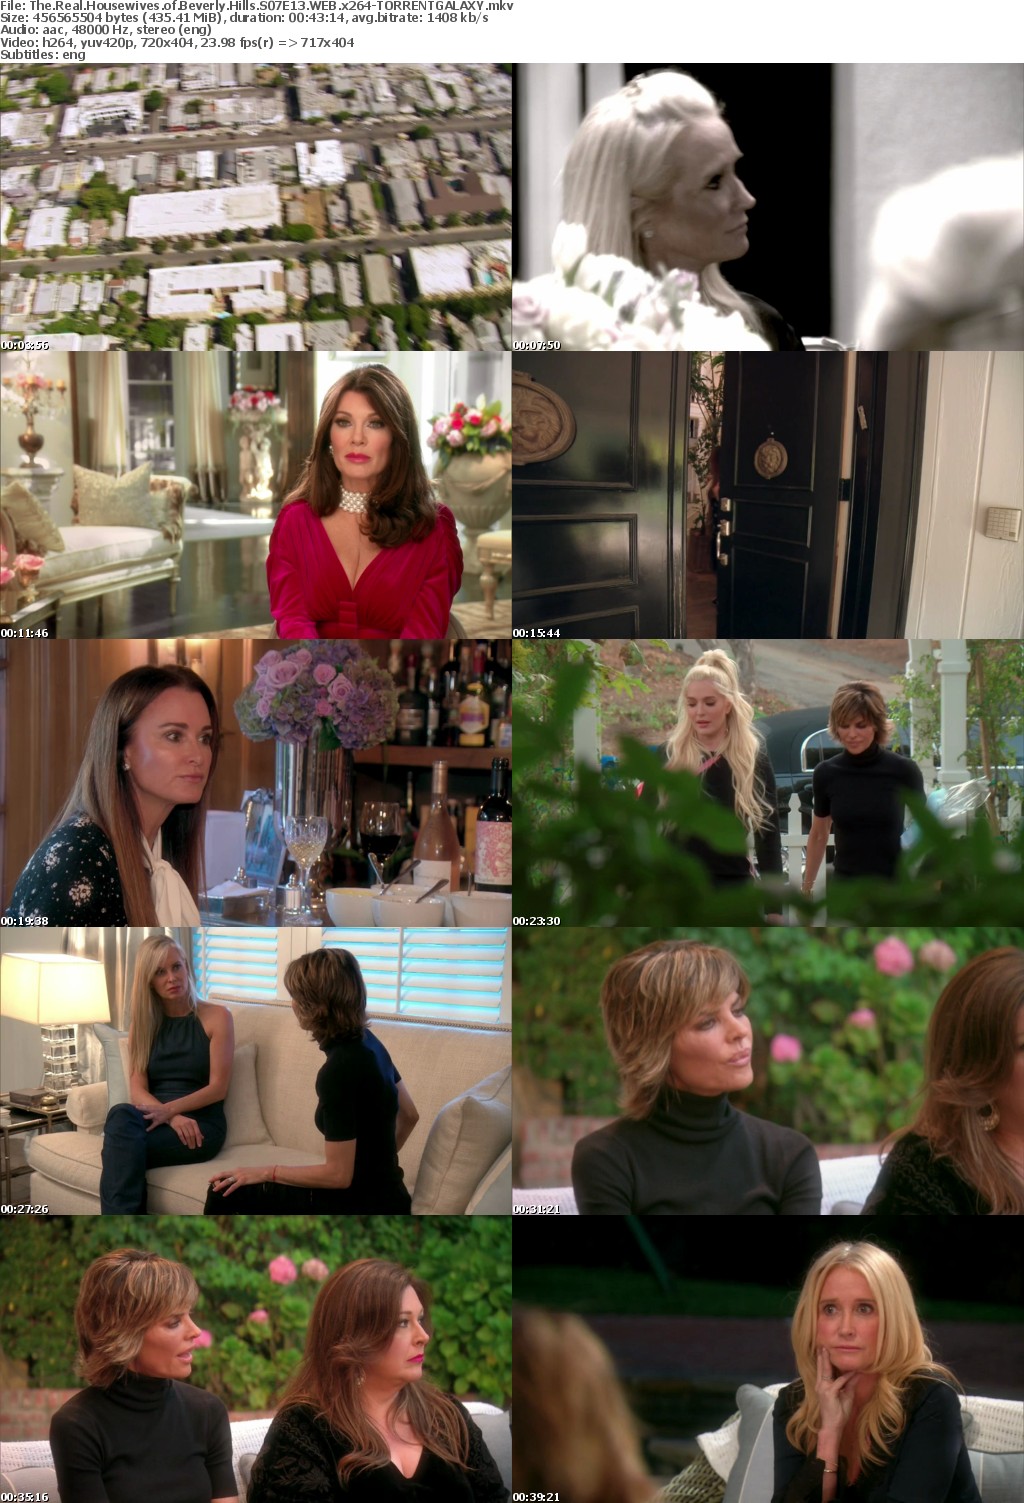 The Real Housewives of Beverly Hills S07E13 WEB x264-GALAXY